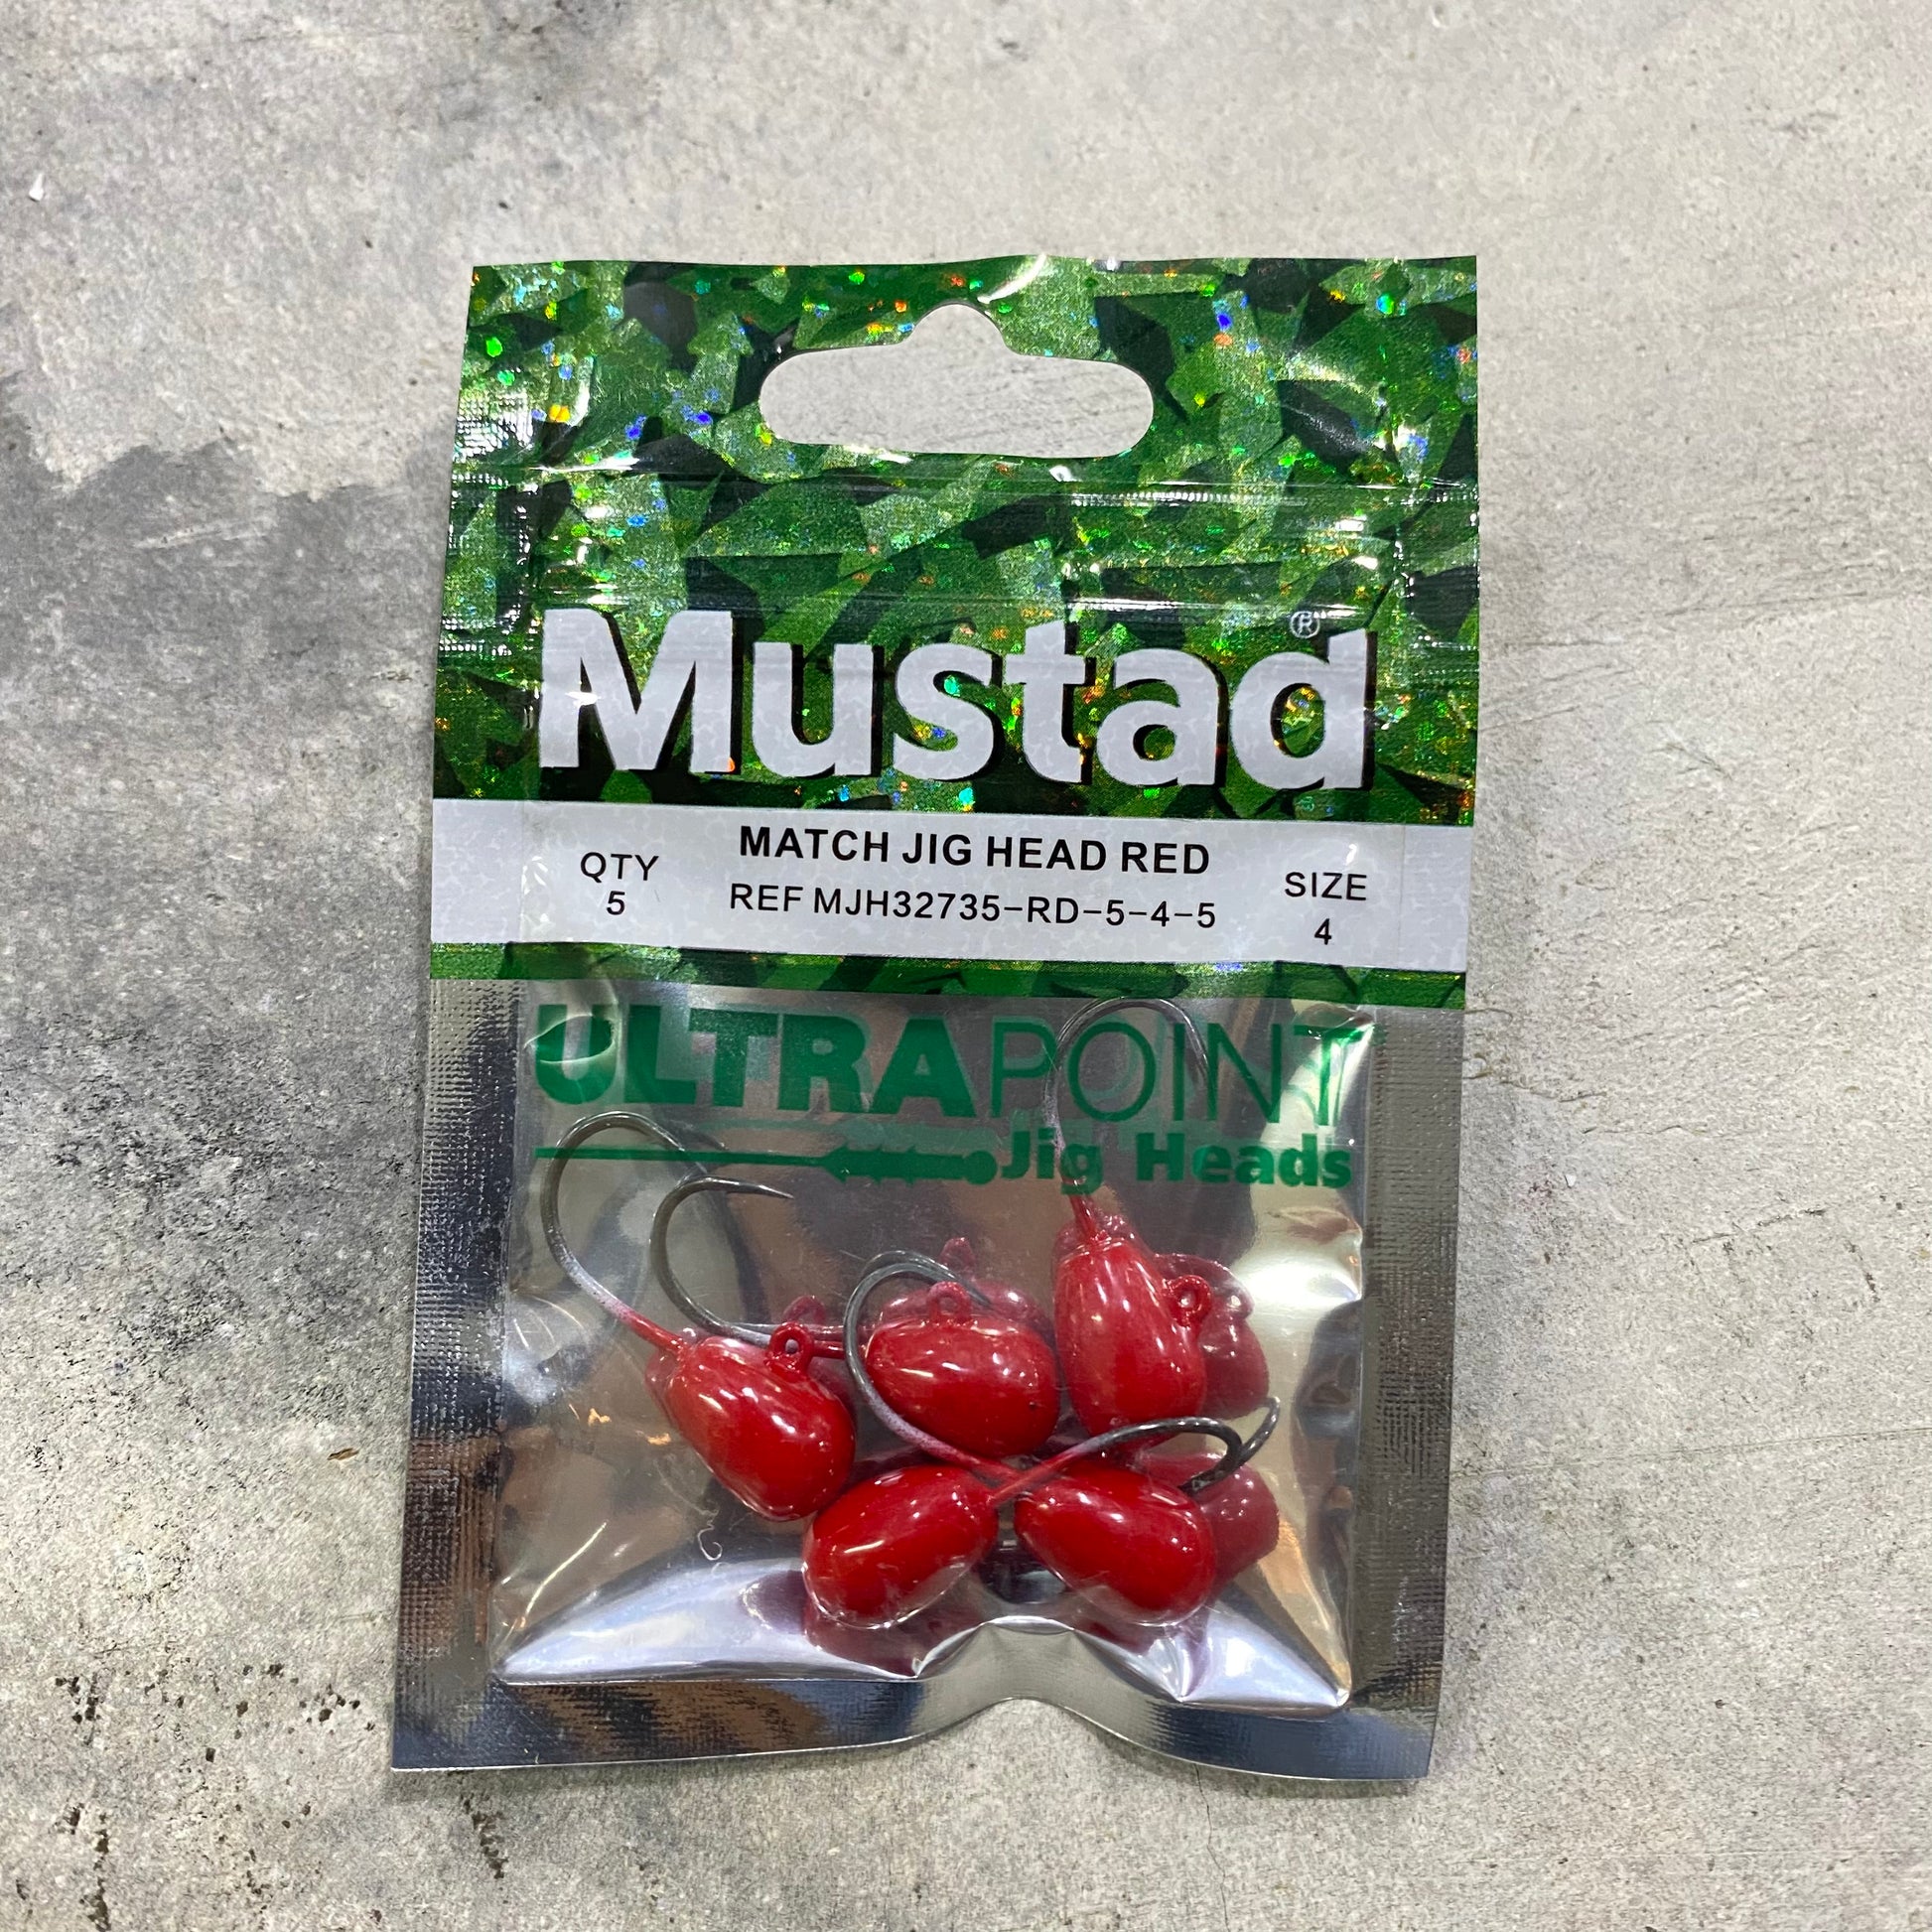 Match Jig Head Red – Anglers Central